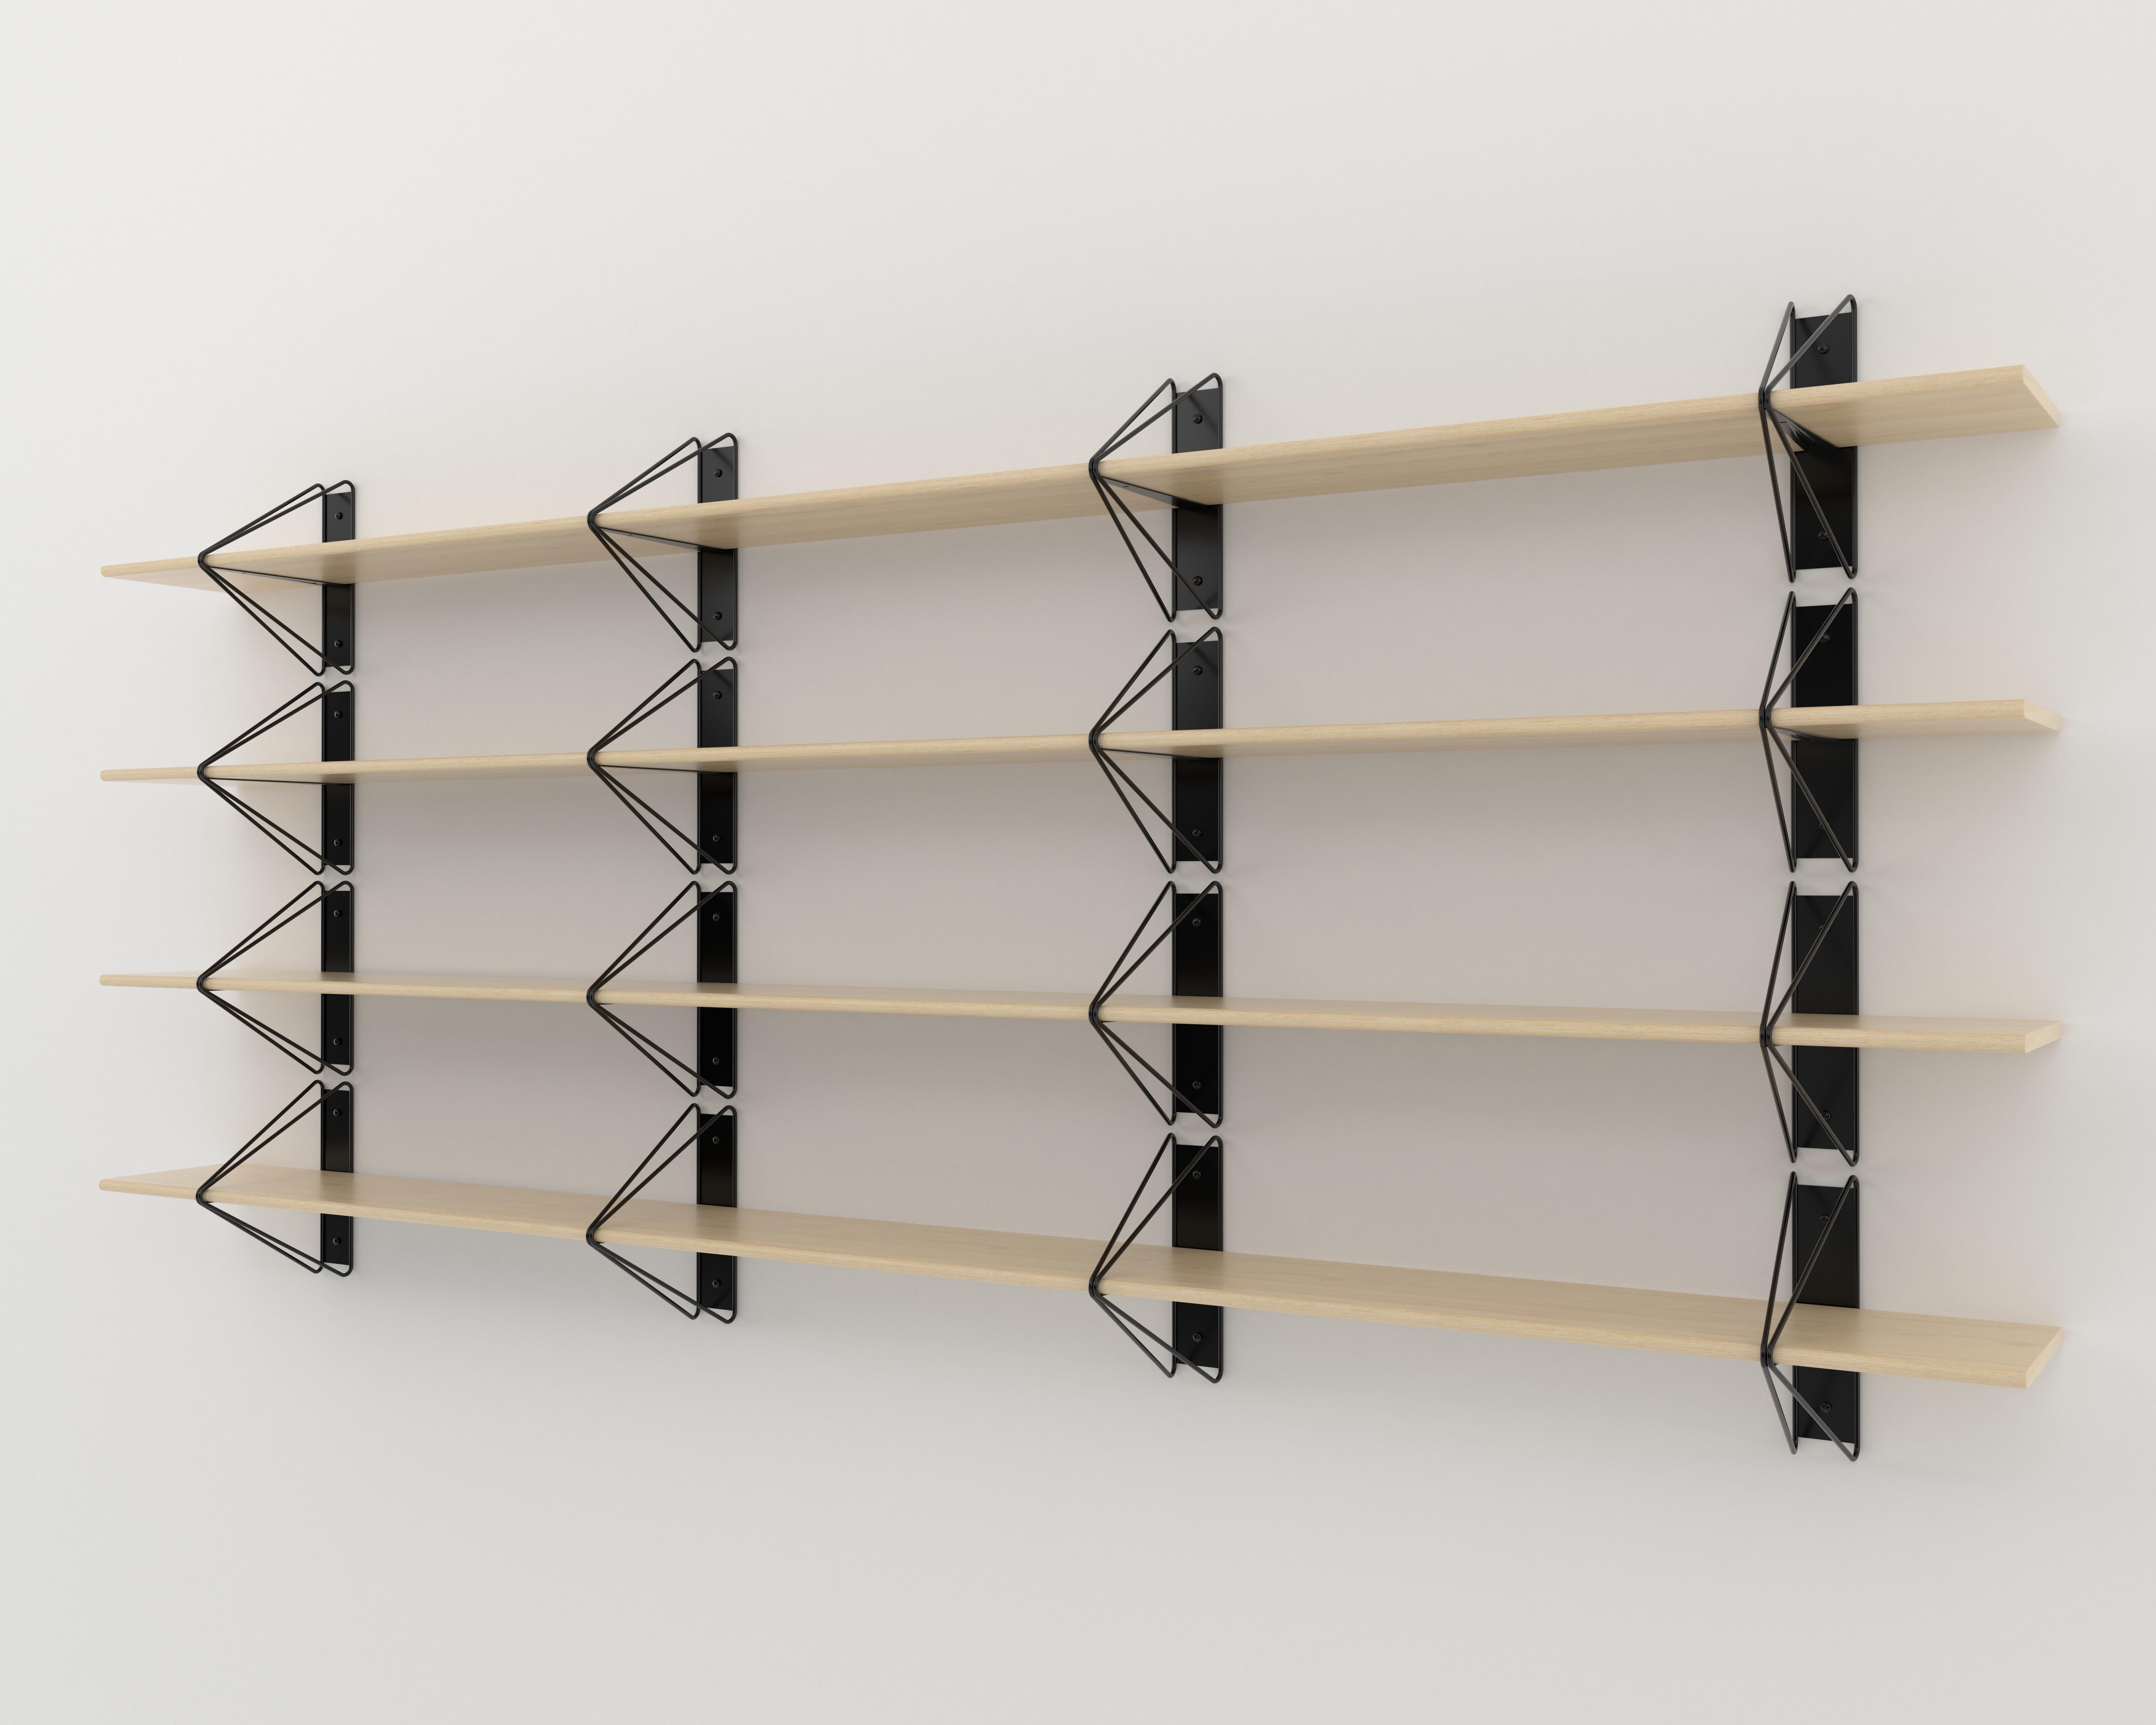 Metal Set of 2 Strut Shelves from Souda, Black and Maple, Made to Order For Sale